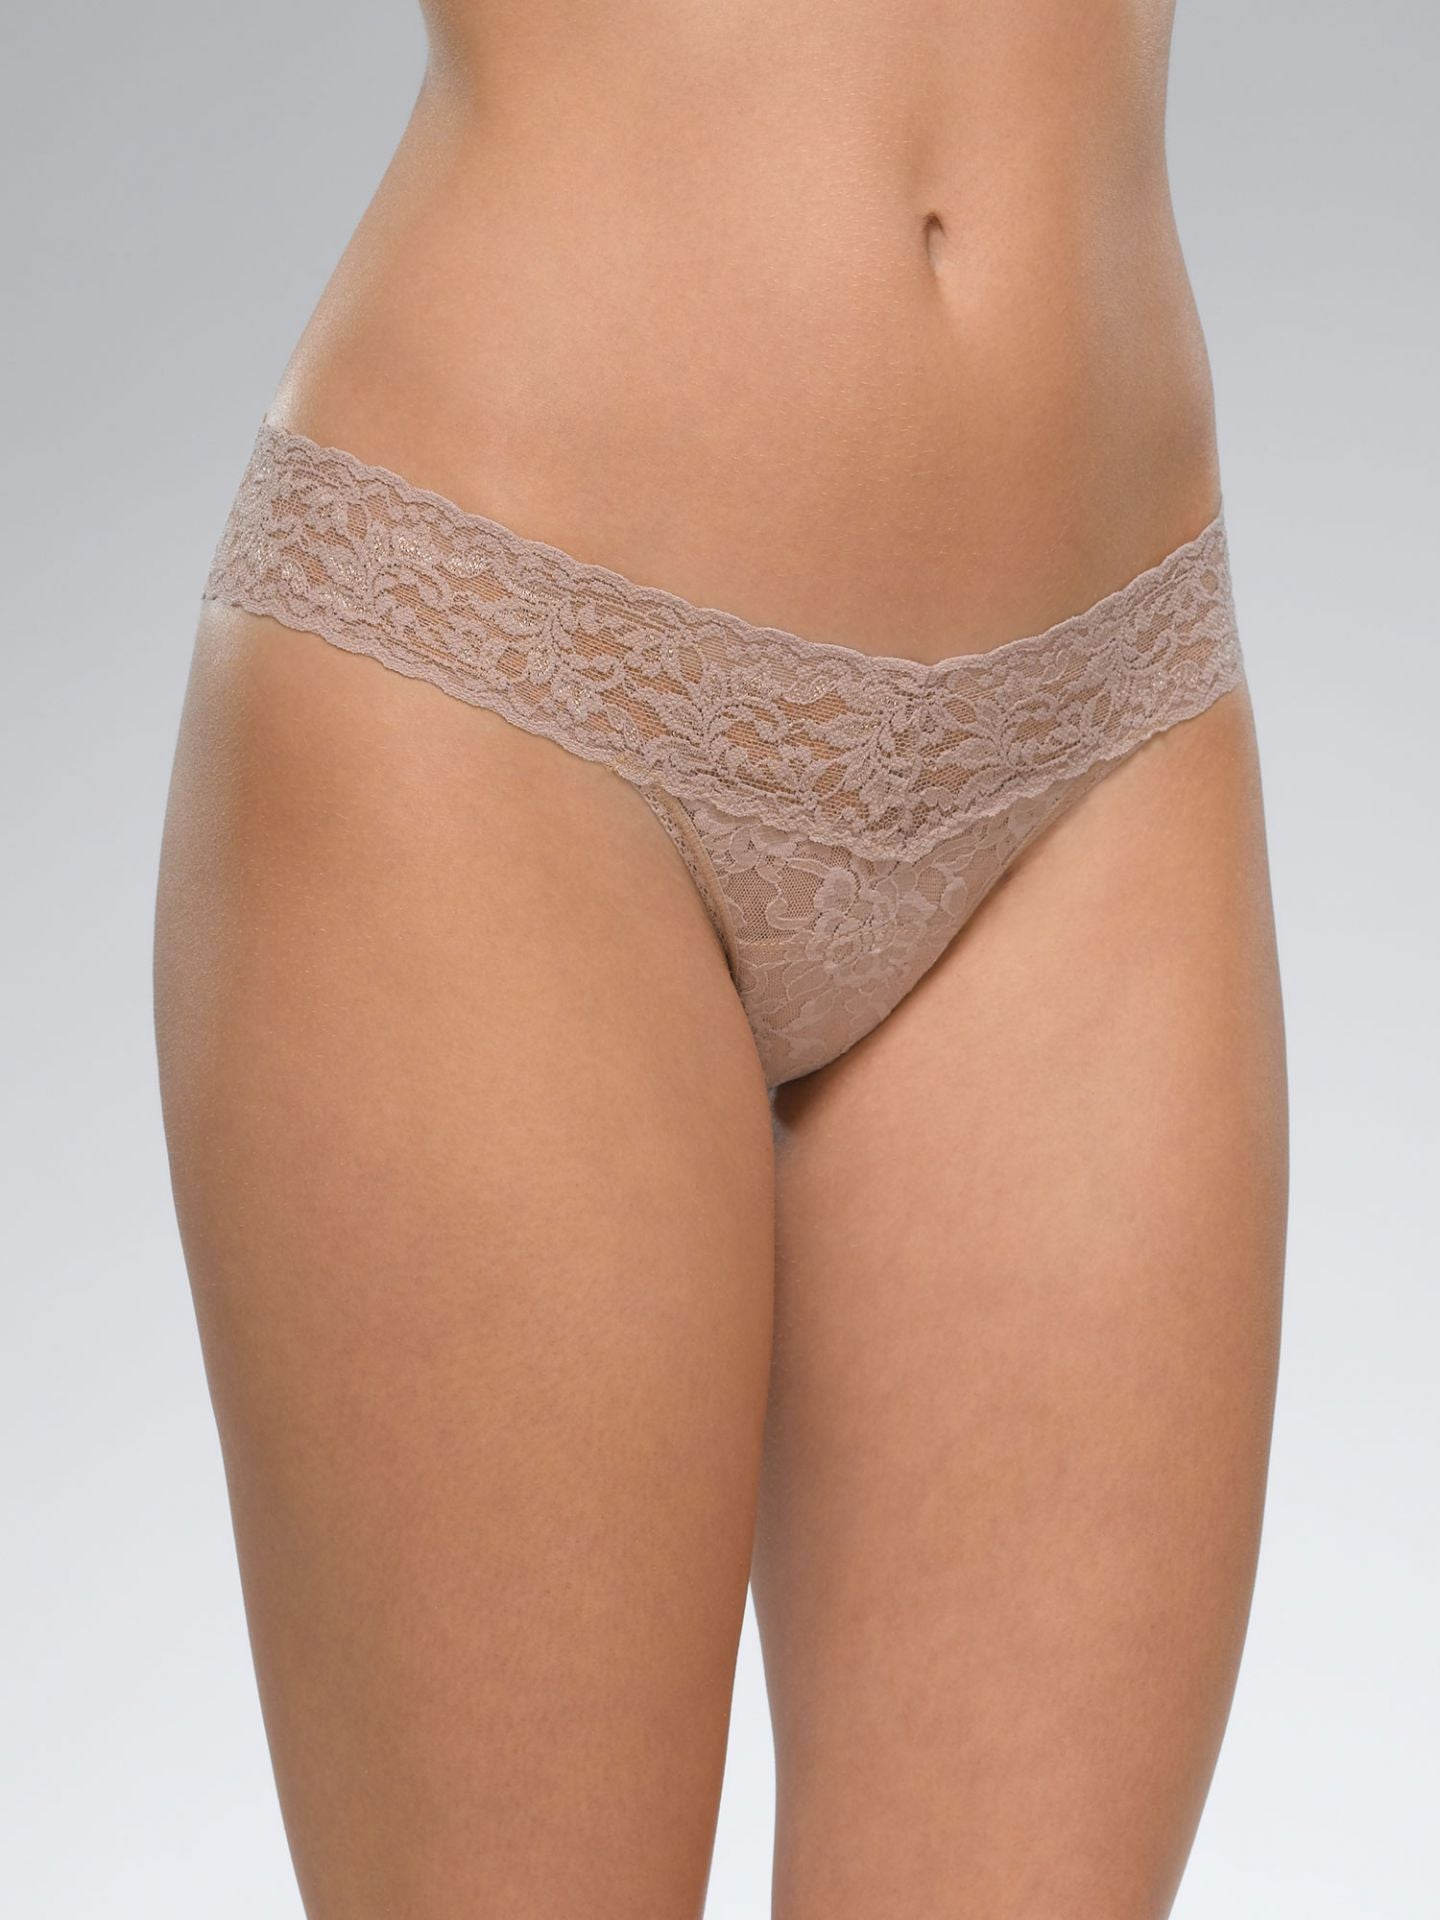 Women's Signature Lace Low Rise Stretch Thong